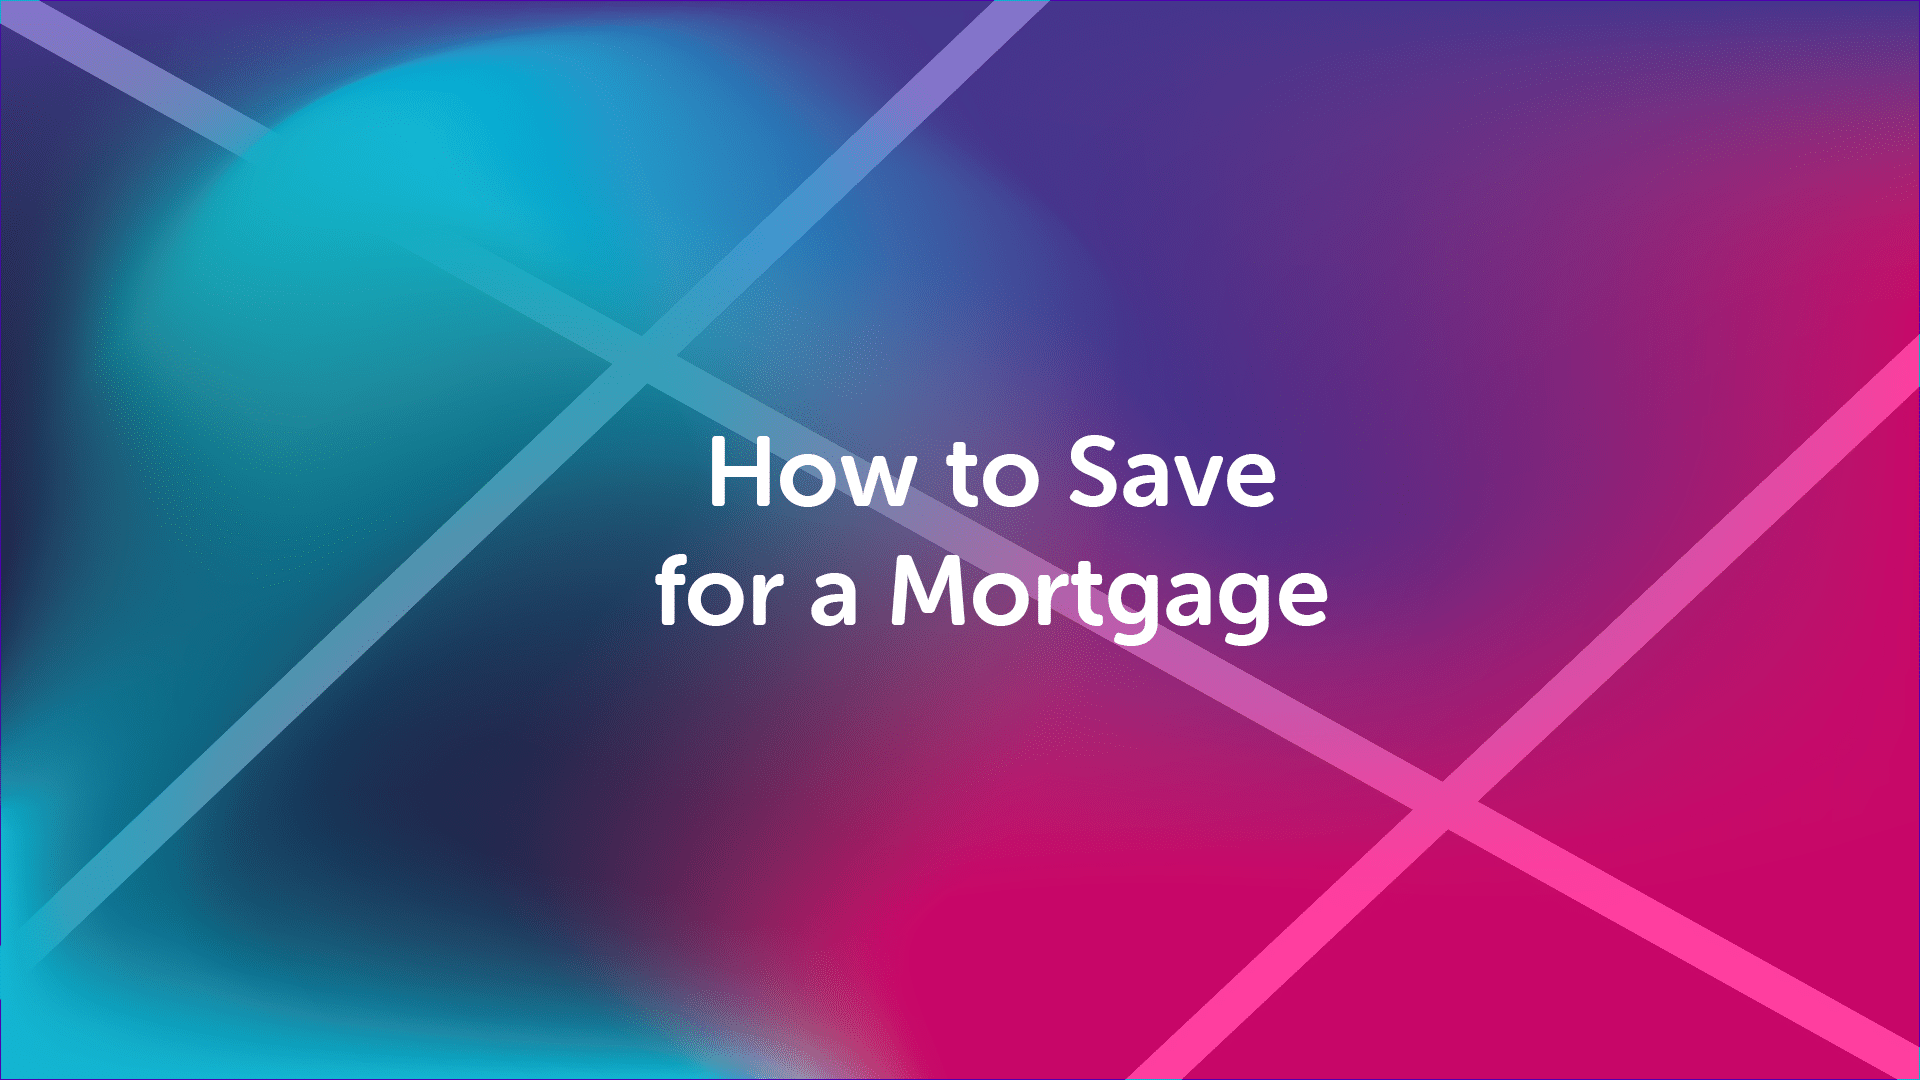 How to Save for a Mortgage